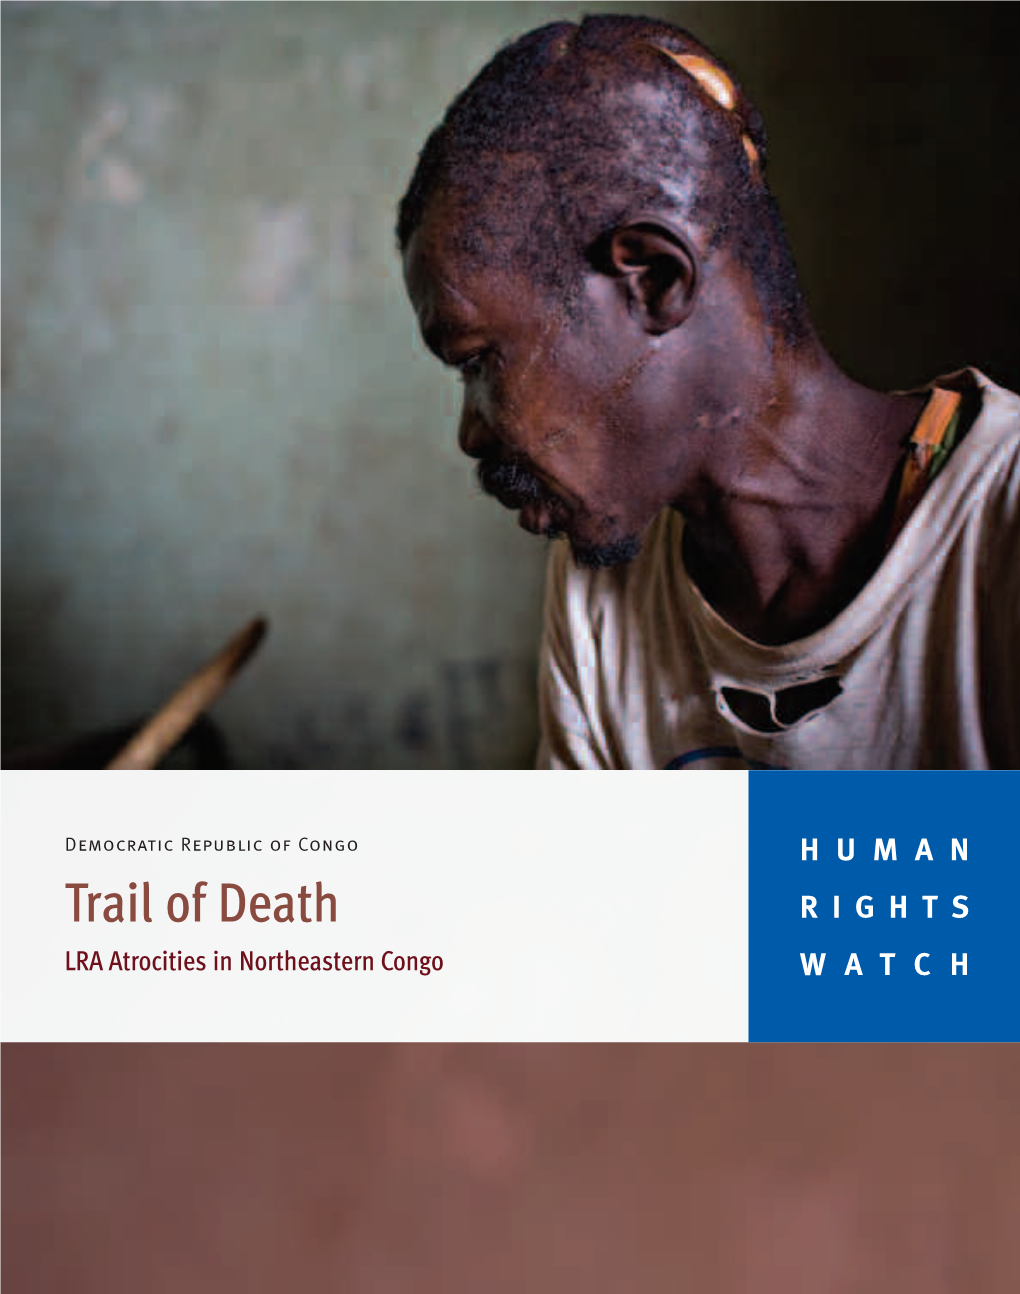 Trail of Death RIGHTS LRA Atrocities in Northeastern Congo WATCH